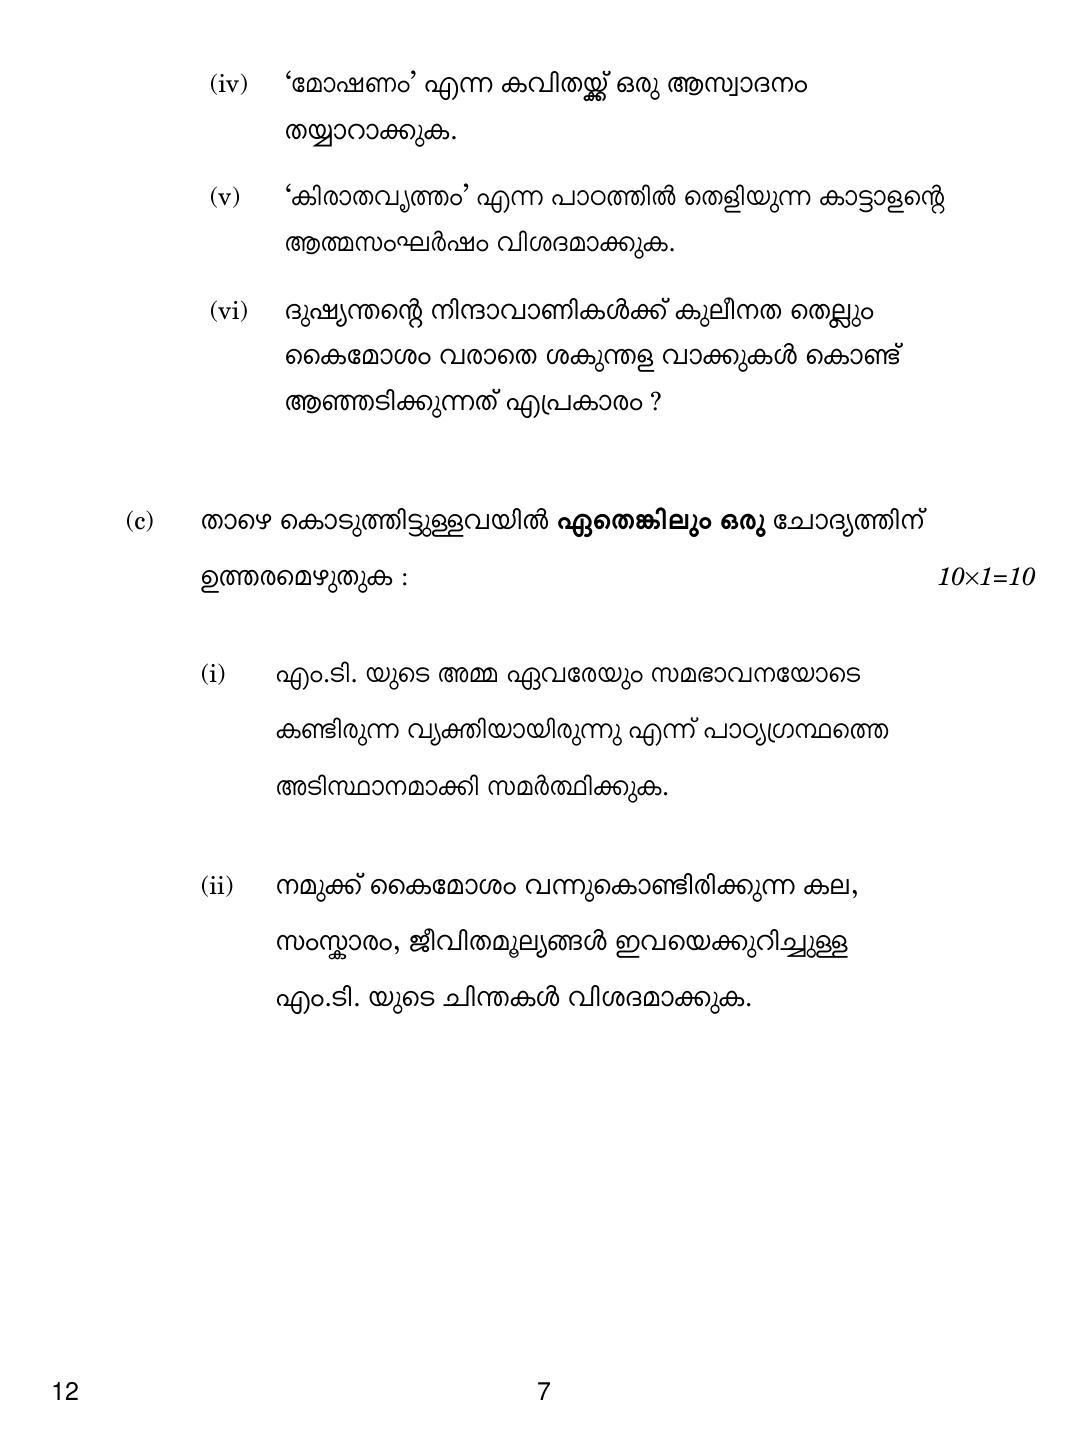 CBSE Class 12 12 Malayalam 2019 Compartment Question Paper - Page 7